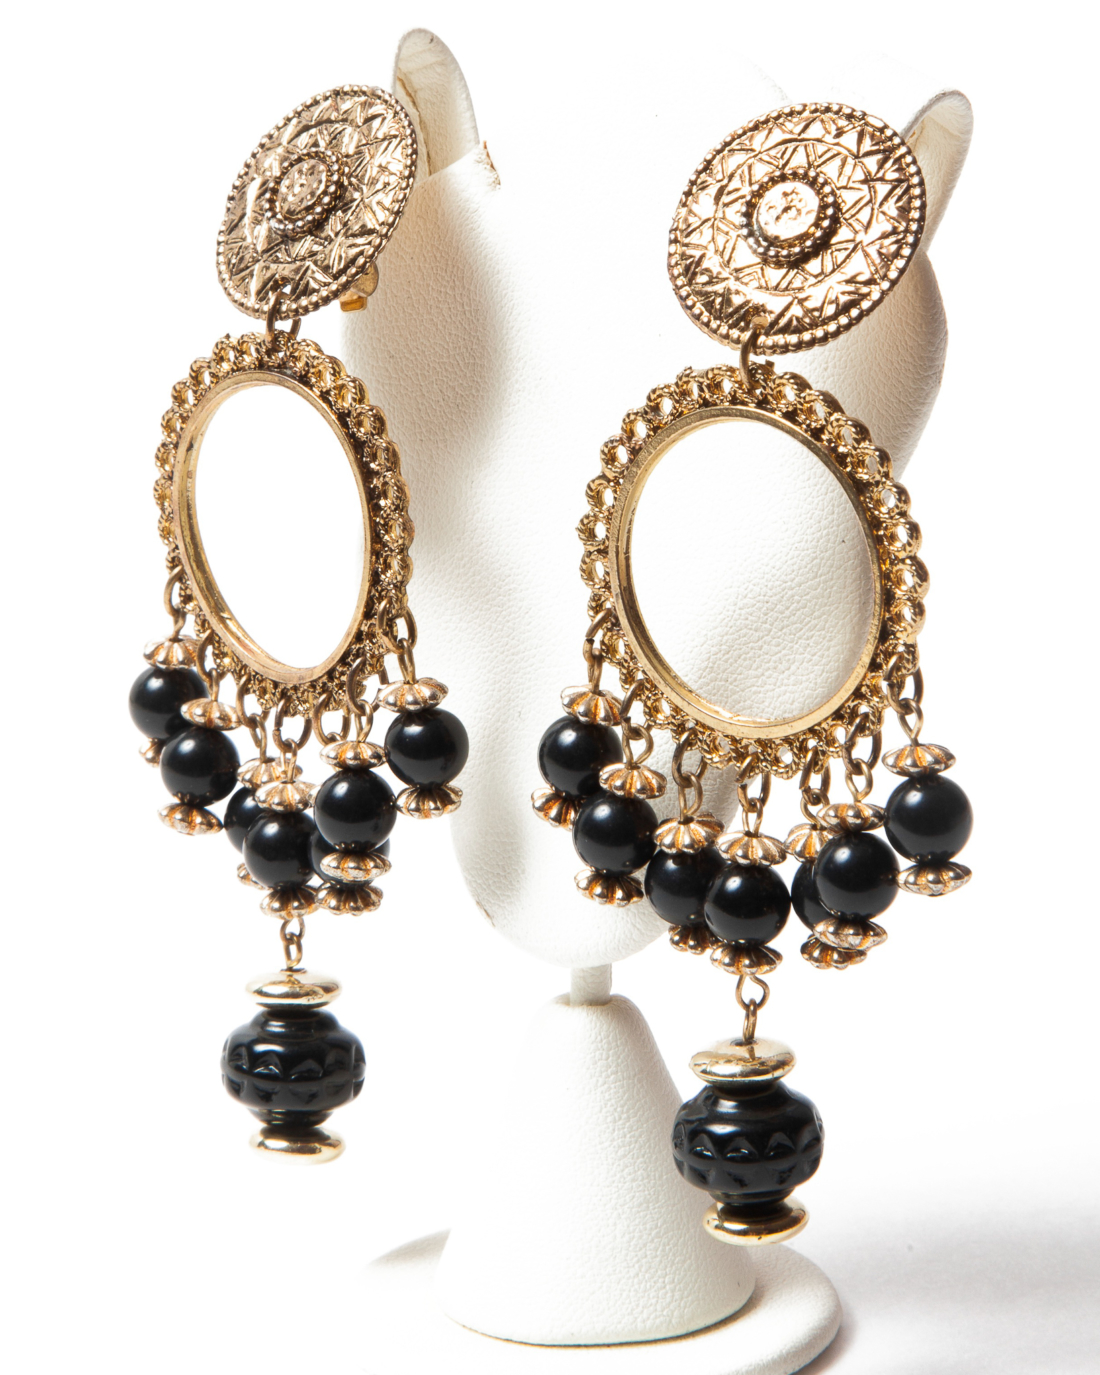 Black and Gold Beaded Gypsy Earrings, circa 1970’s